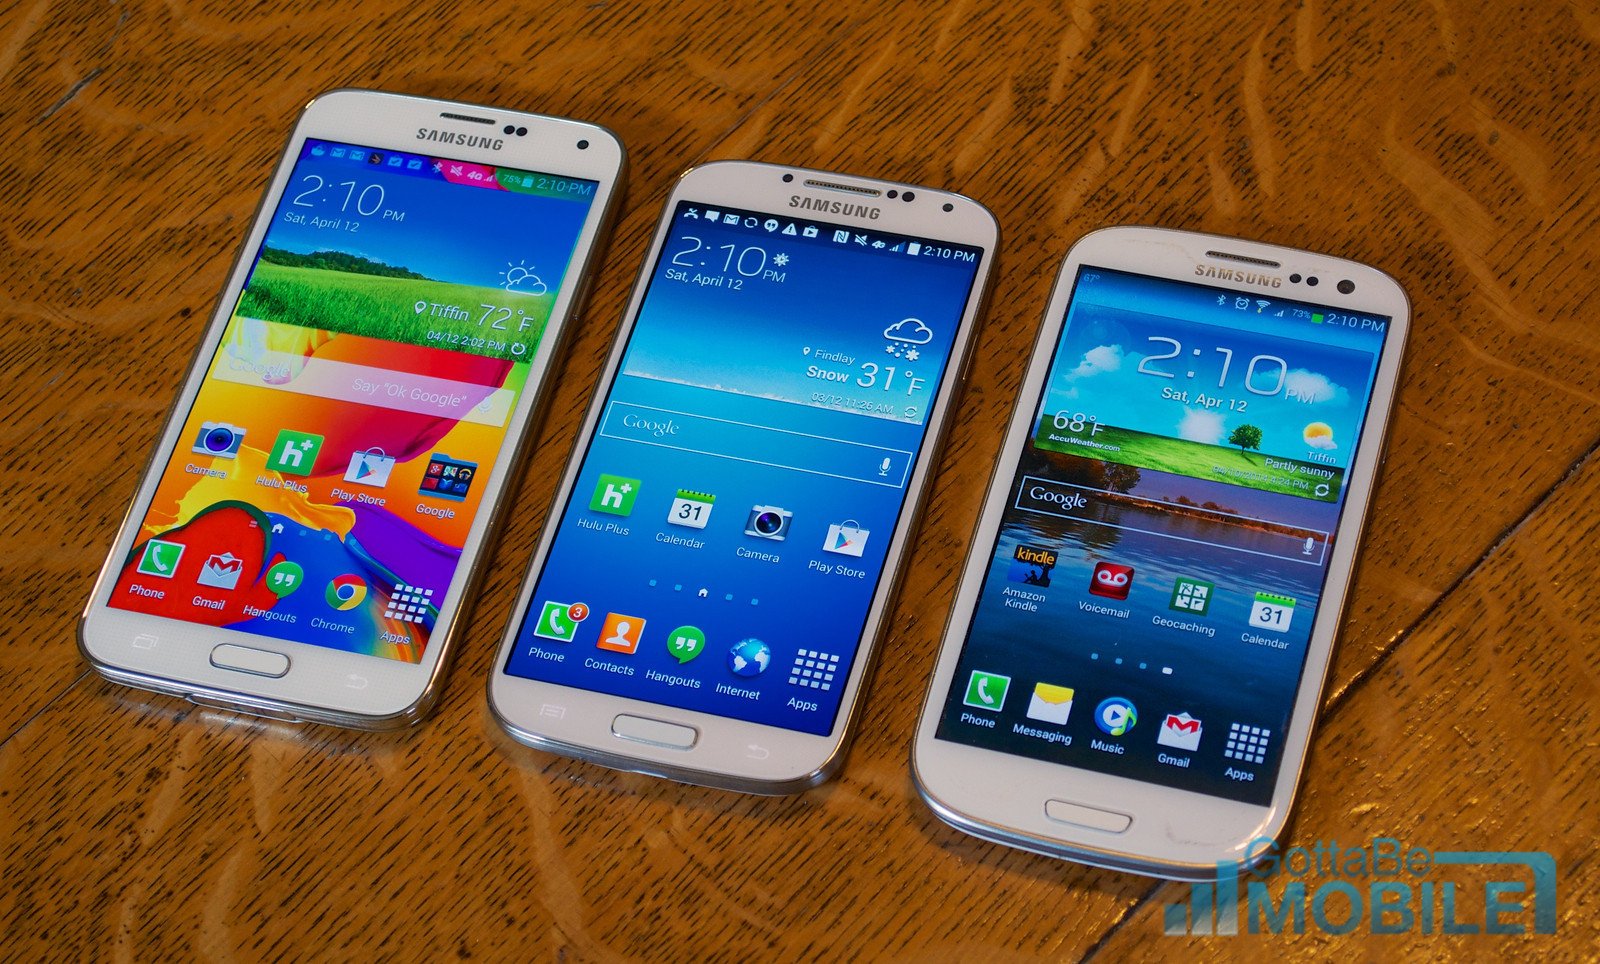 The Galaxy S5 display is brighter and bigger than the Galaxy S3.